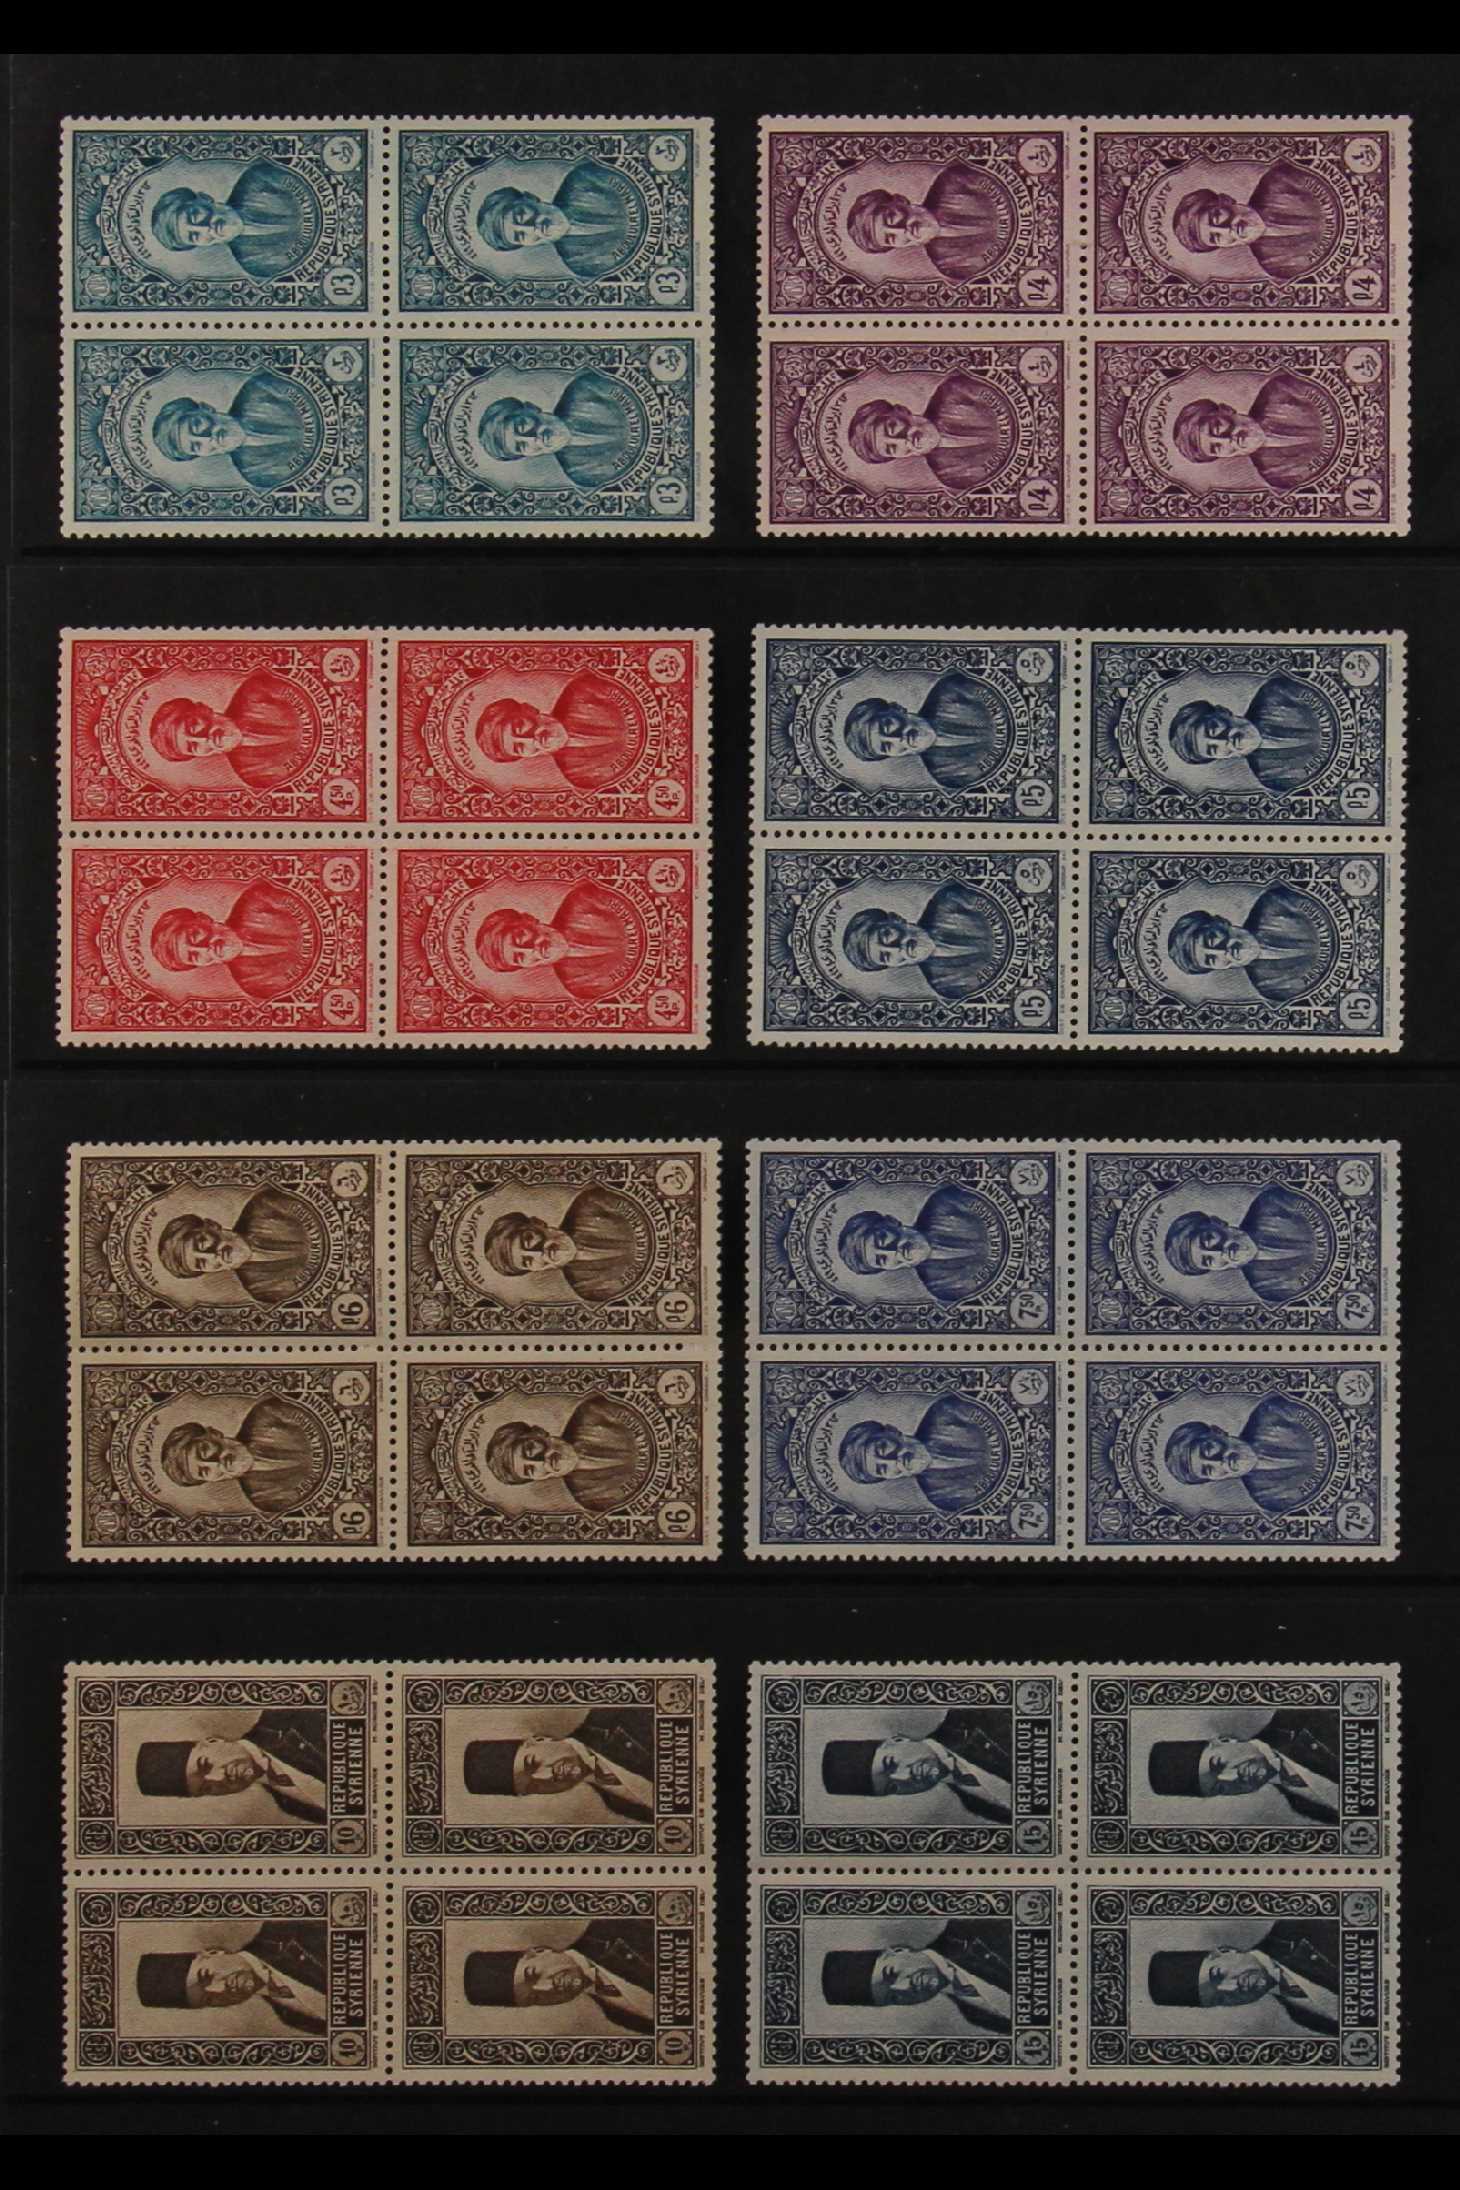 FRENCH COLONIES SYRIA 1934 Establishment of Republic complete set including Airs (SG 271/89 & 290/ - Image 4 of 4